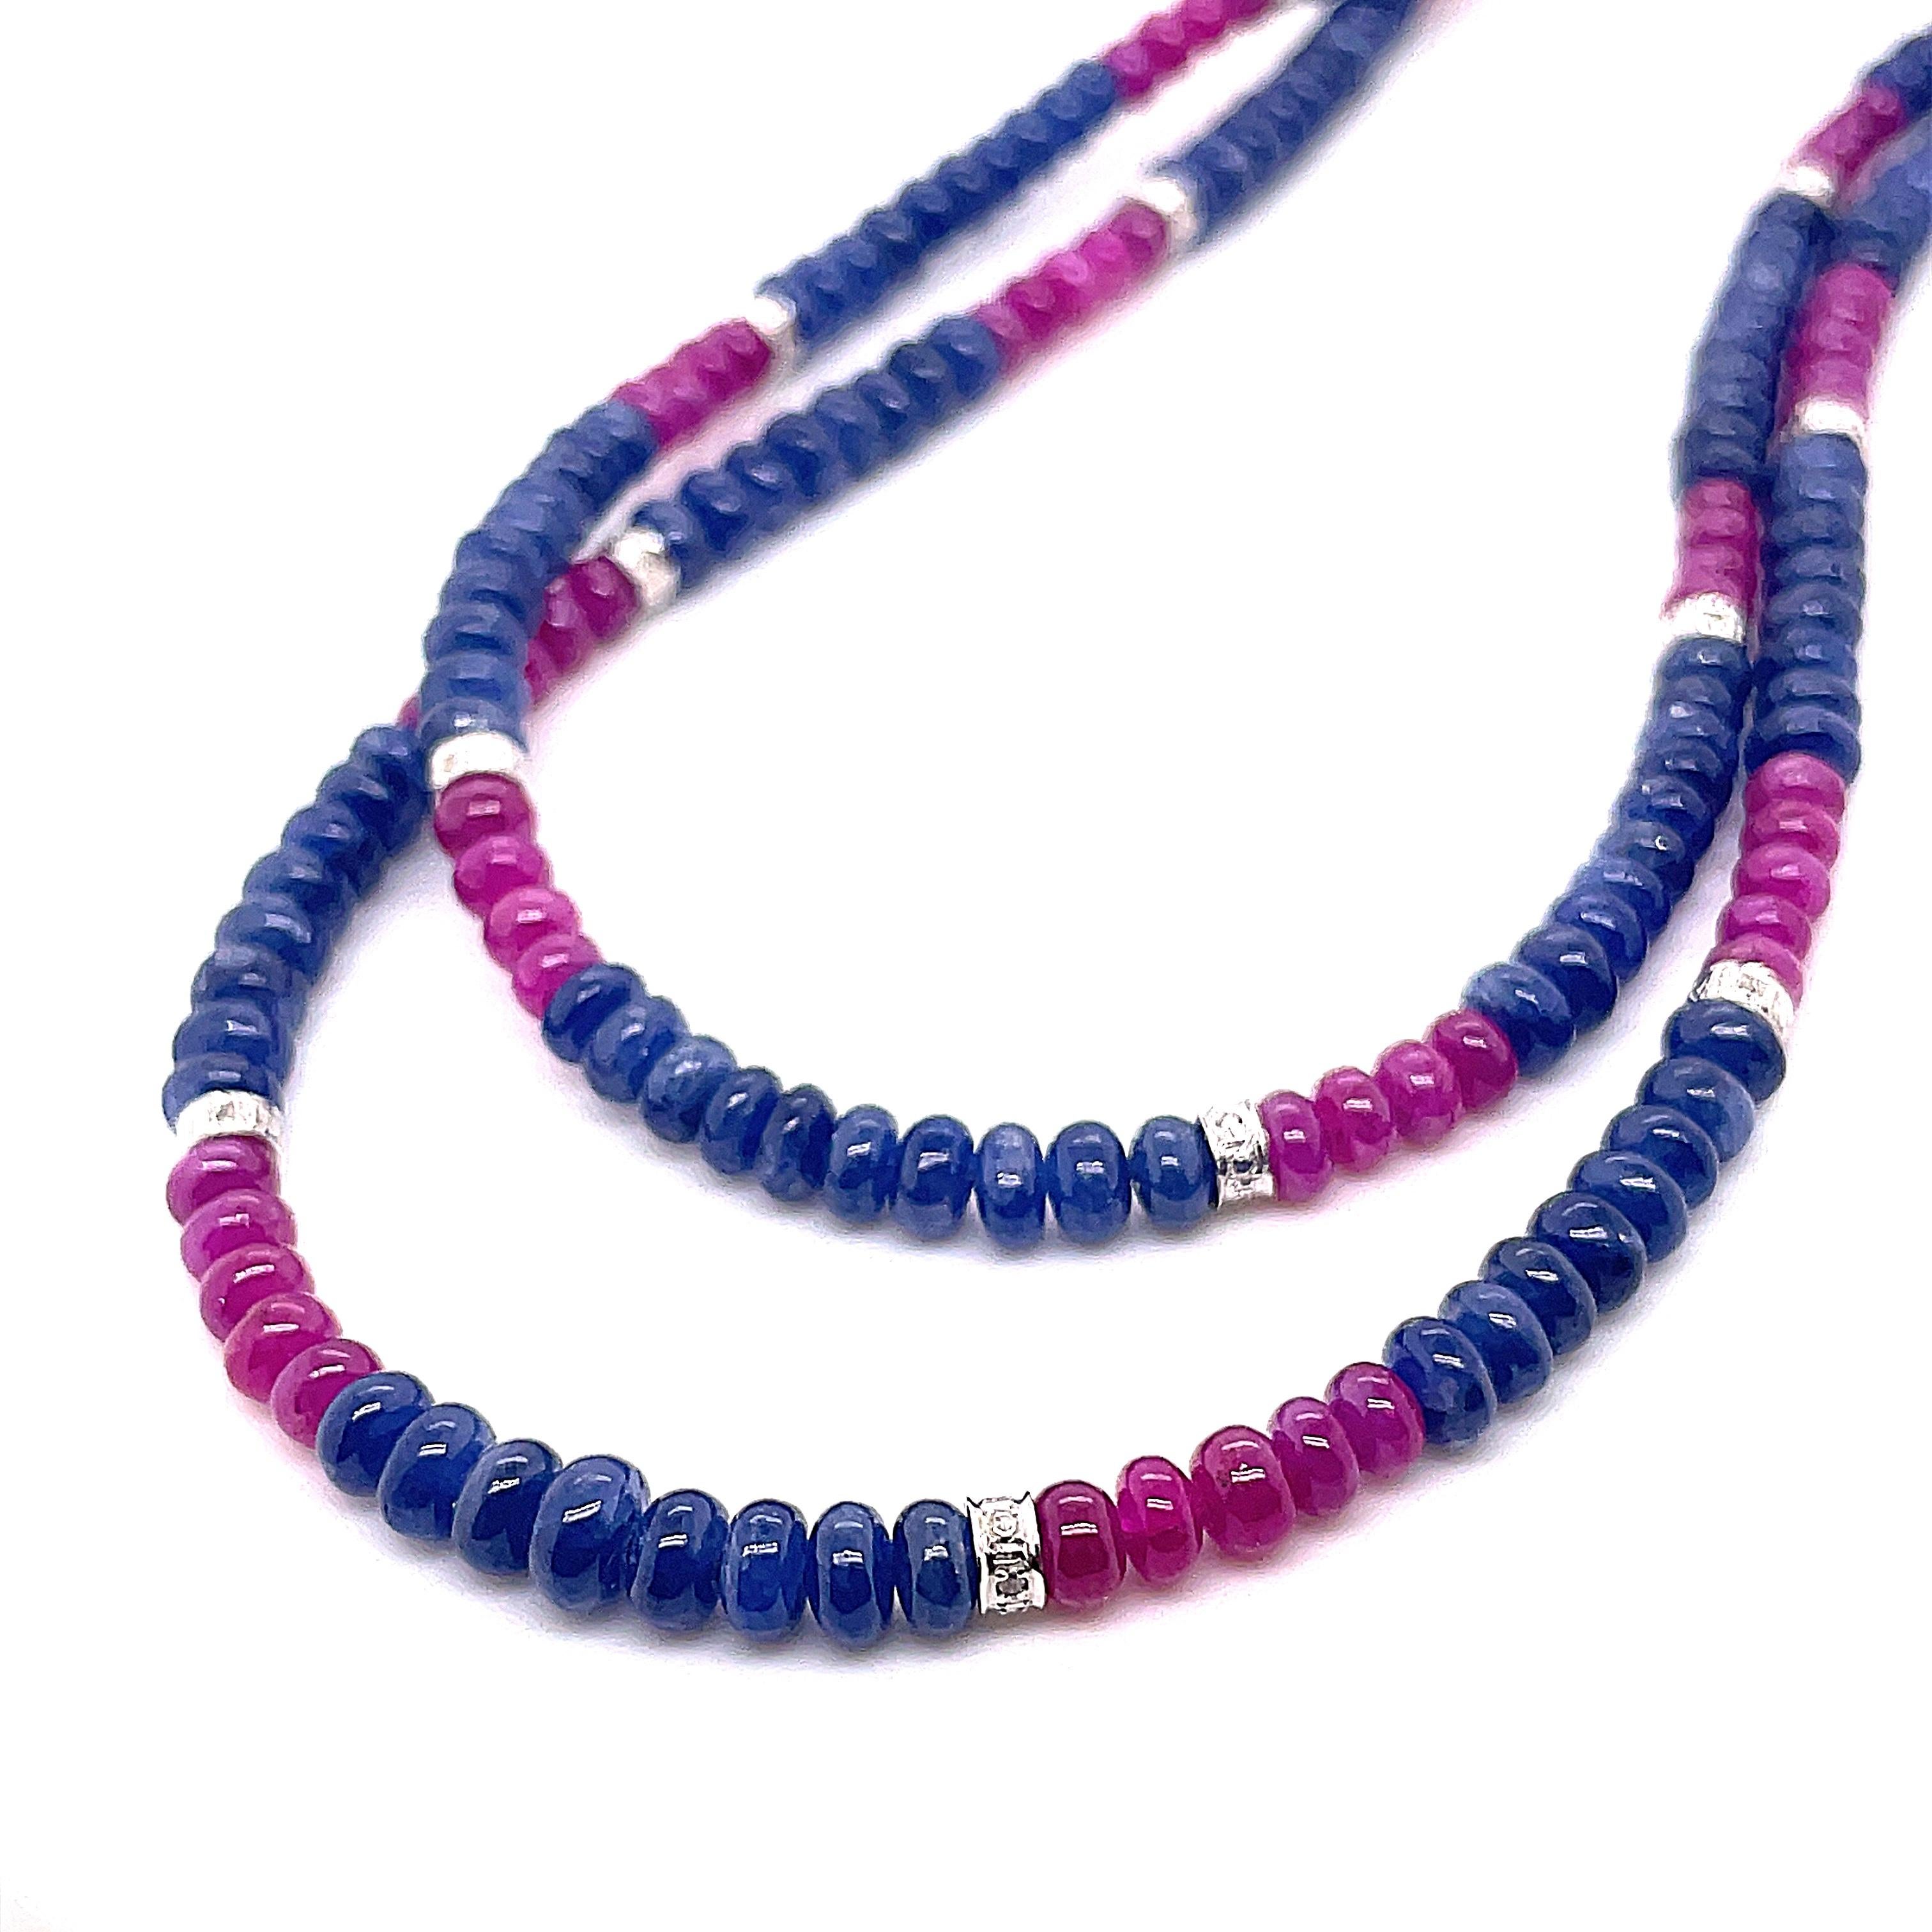 Burmese Ruby and Sapphire Beads White Diamond Gold Necklace For Sale 3